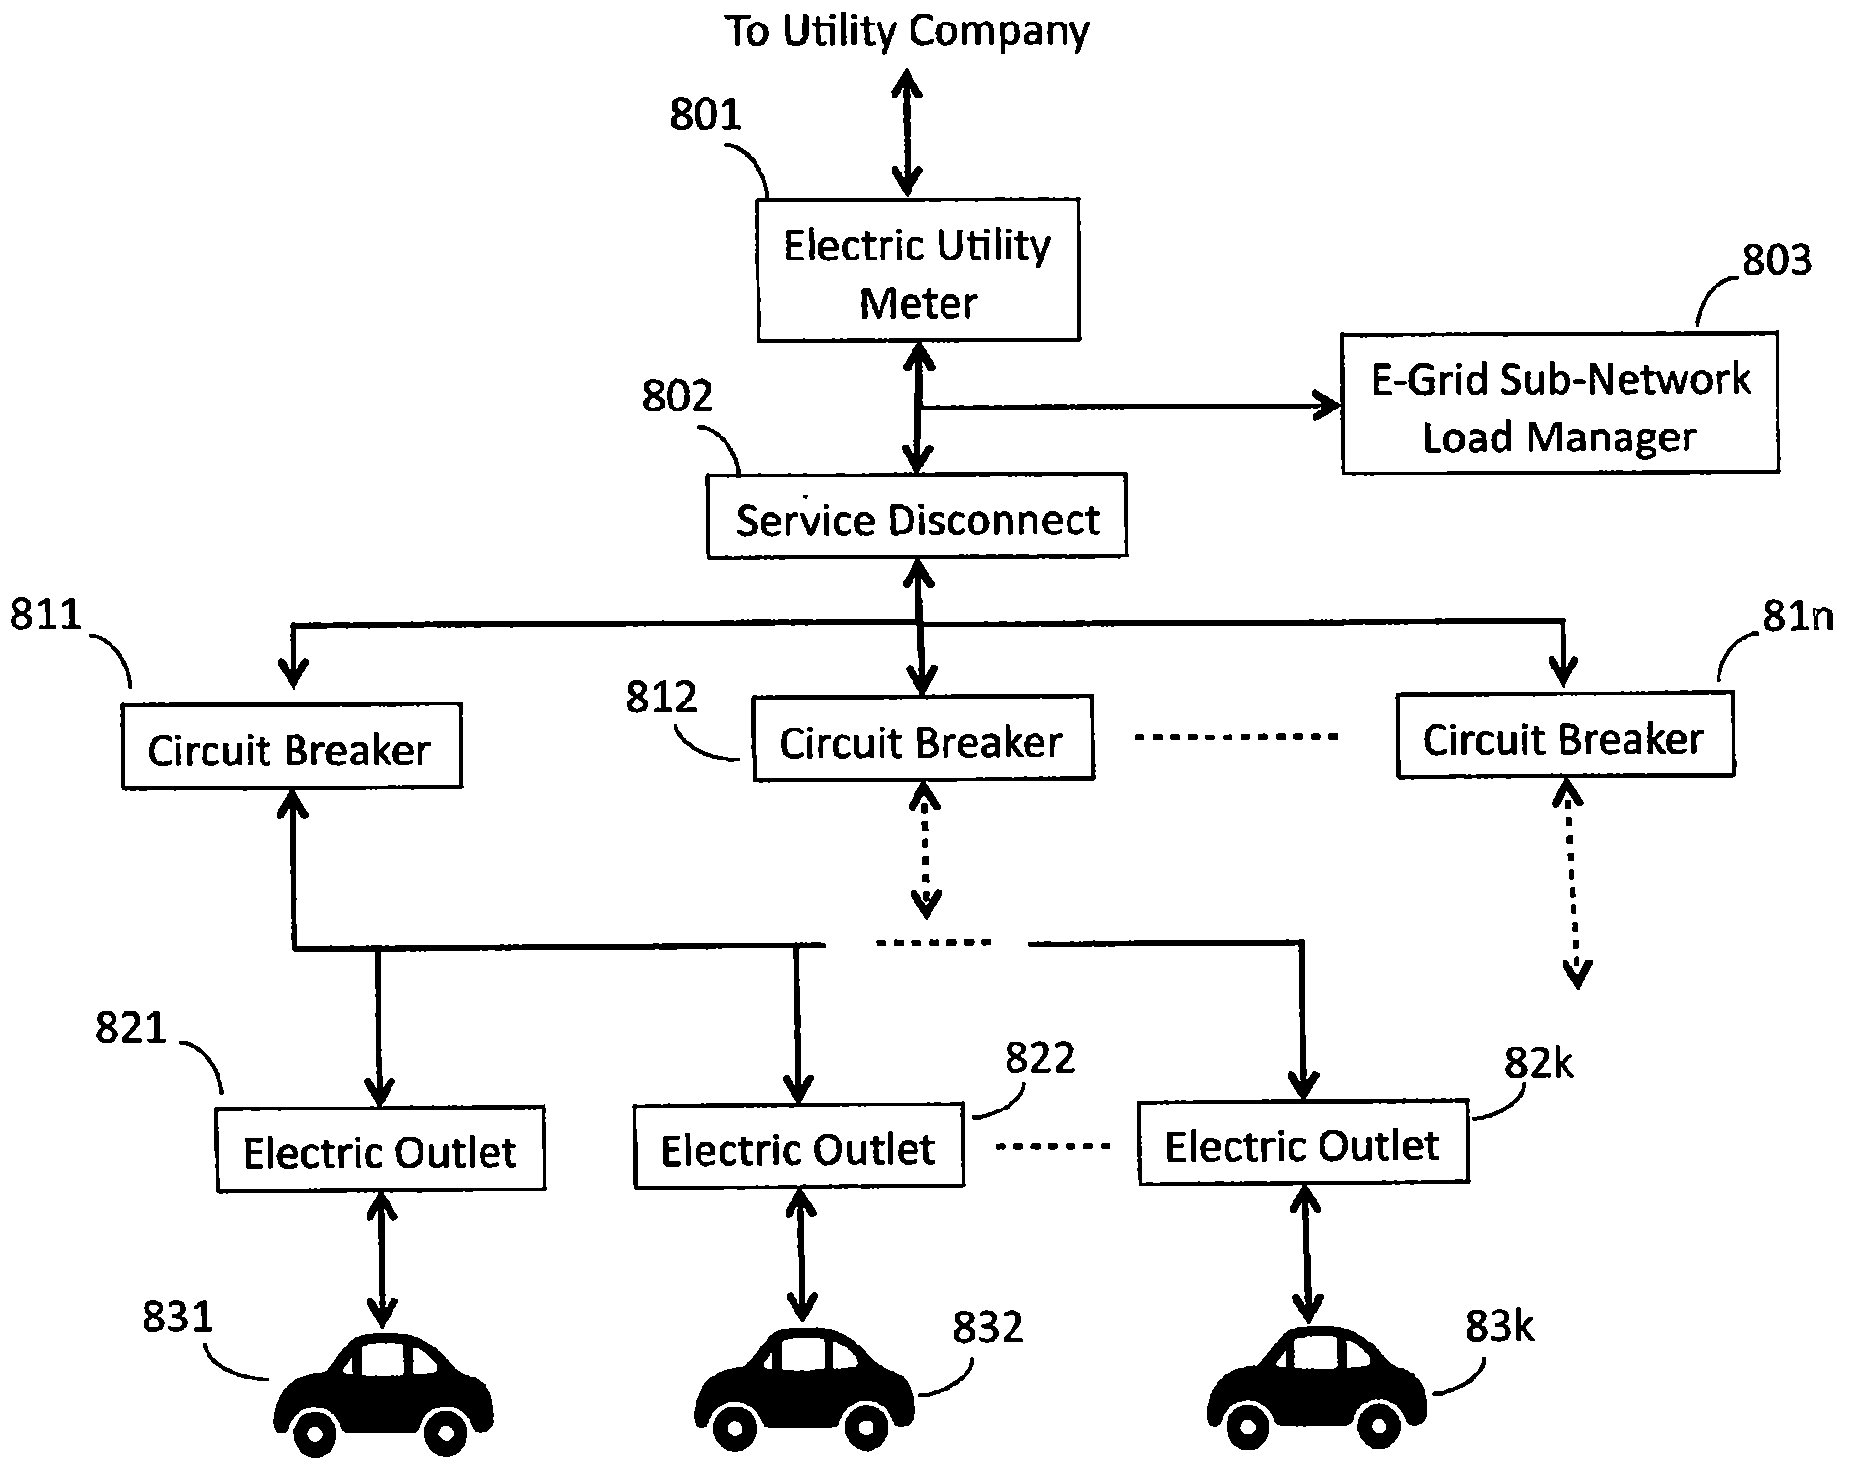 Intra-vehicle charging system for use in recharging vehicles equipped with electrically powered propulsion systems